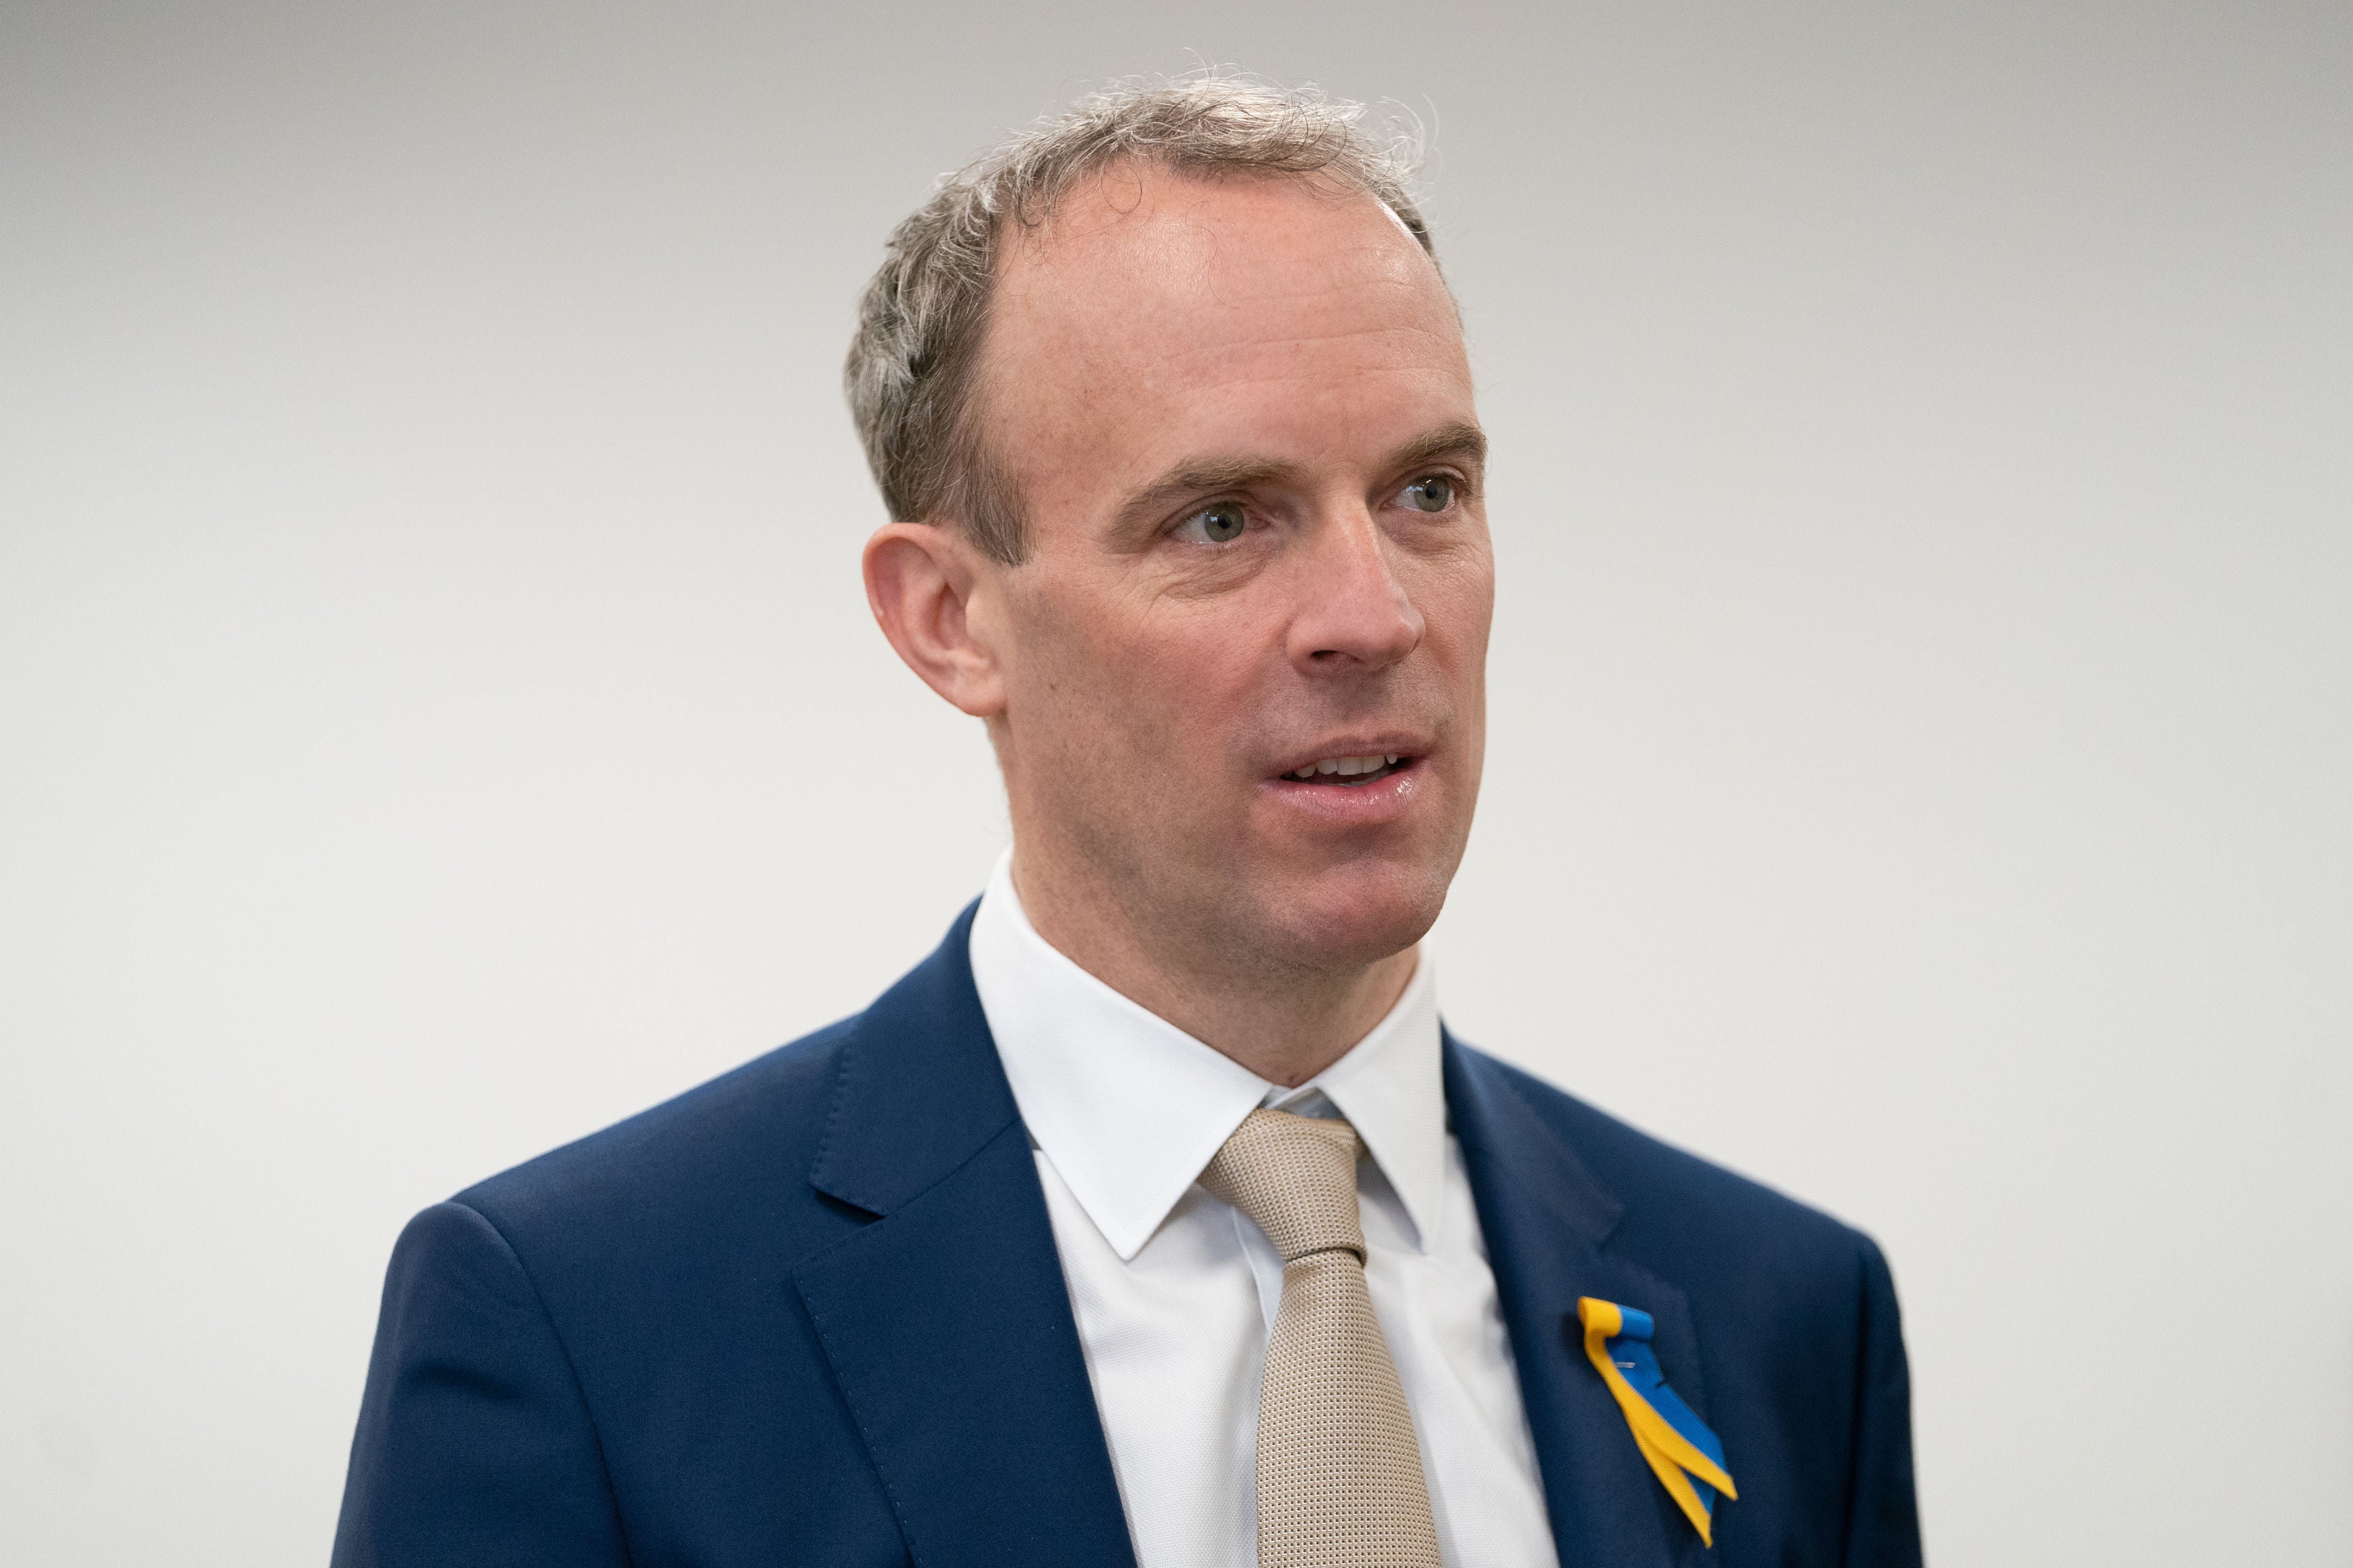 Dominic Raab has exercised new powers to block the release of a dangerous offender